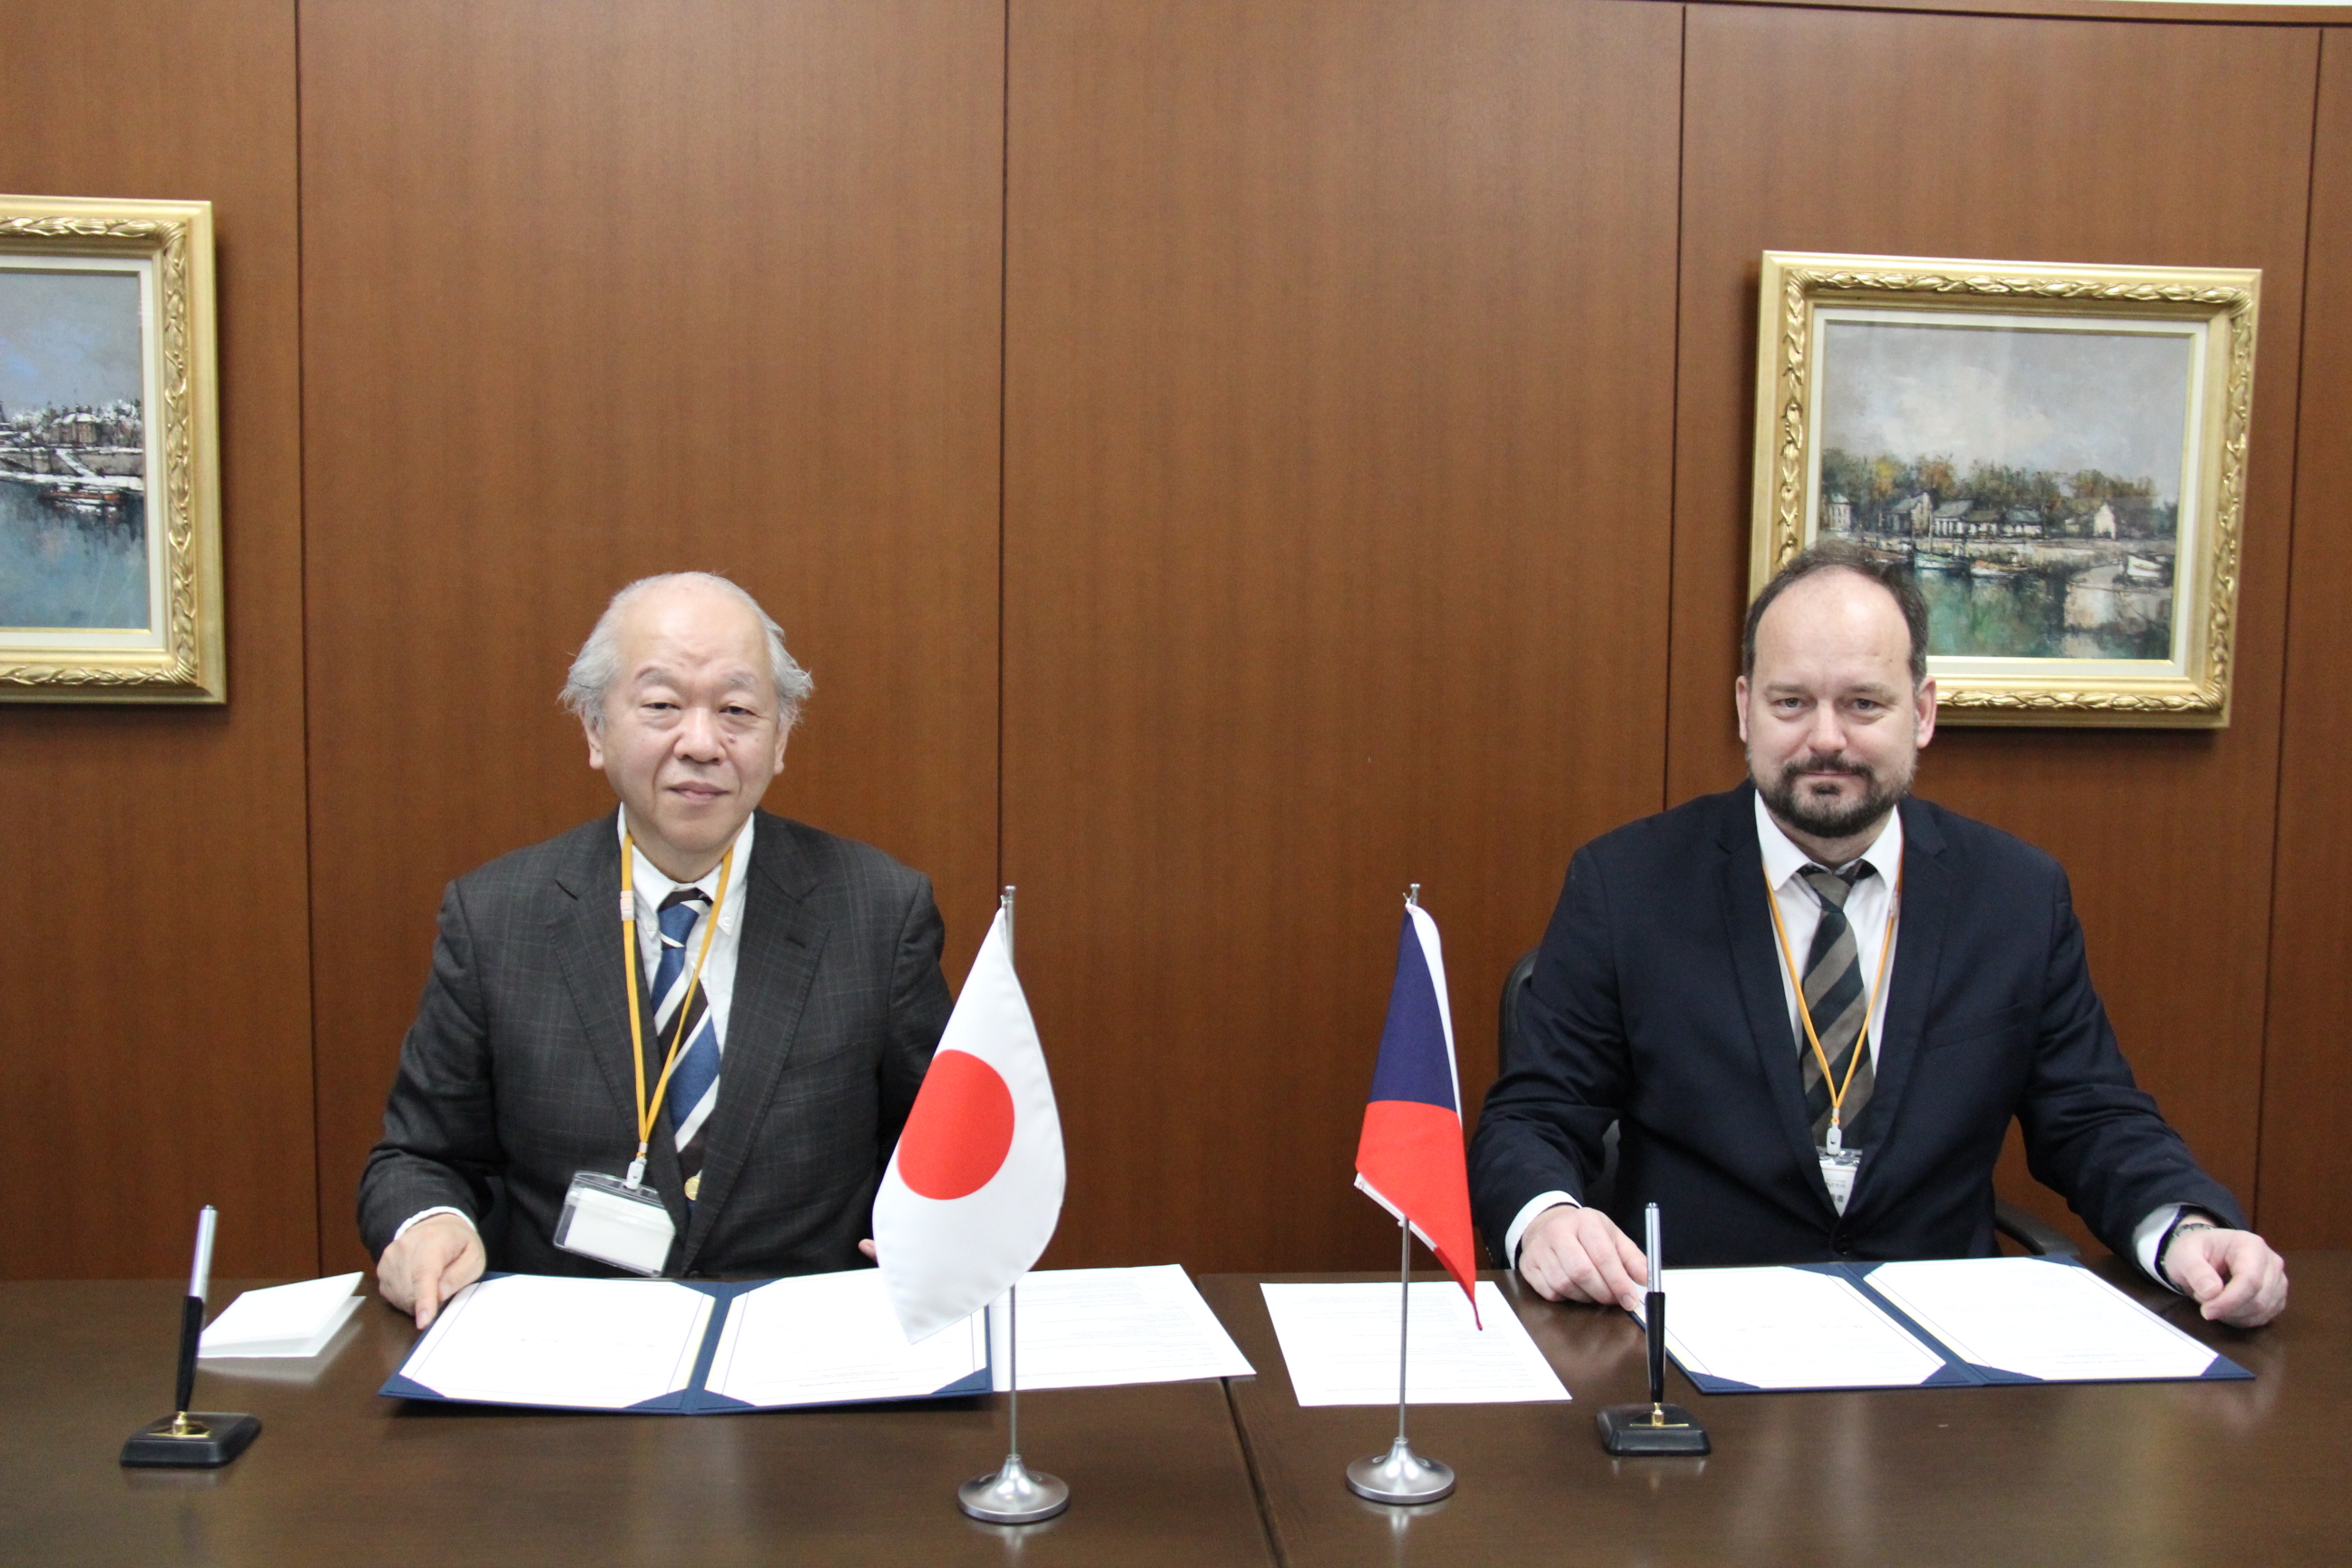 Prof. Tsubaki and Prof. Surovy (from Czech)